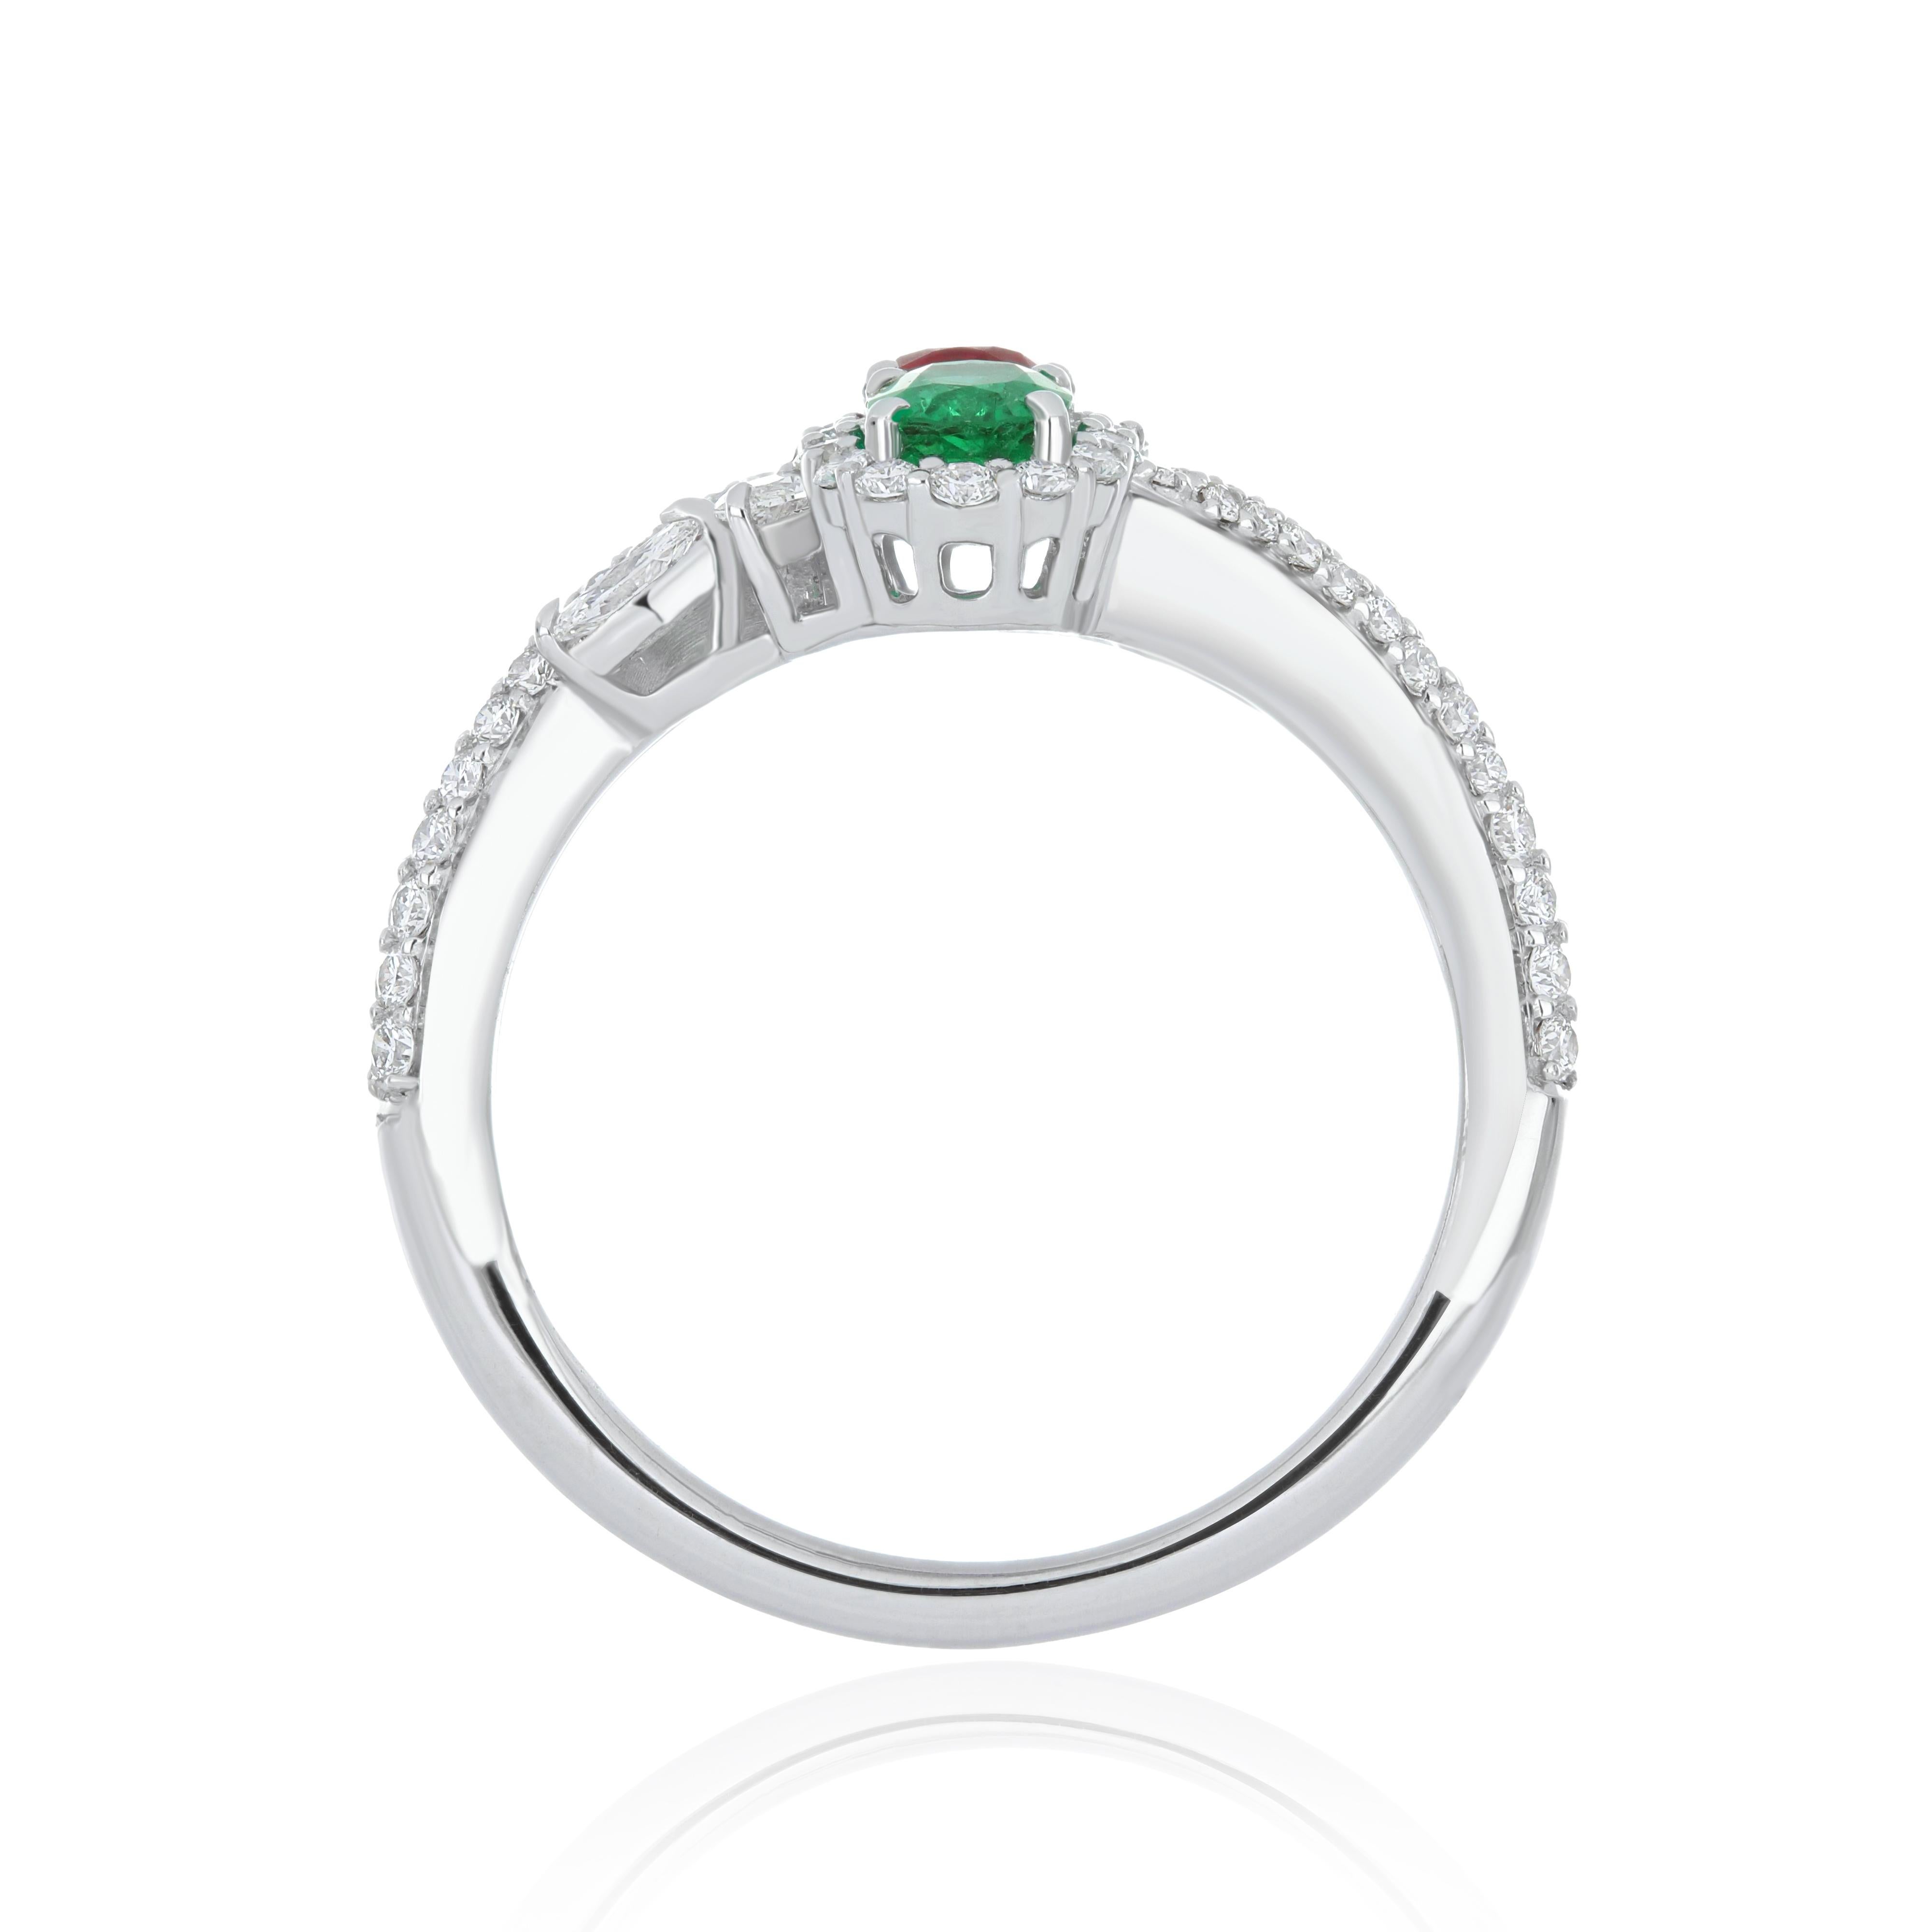 Ruby Mozambique, Emerald, Blue Sapphire and Diamond Ring 18 Karat White Gold 5